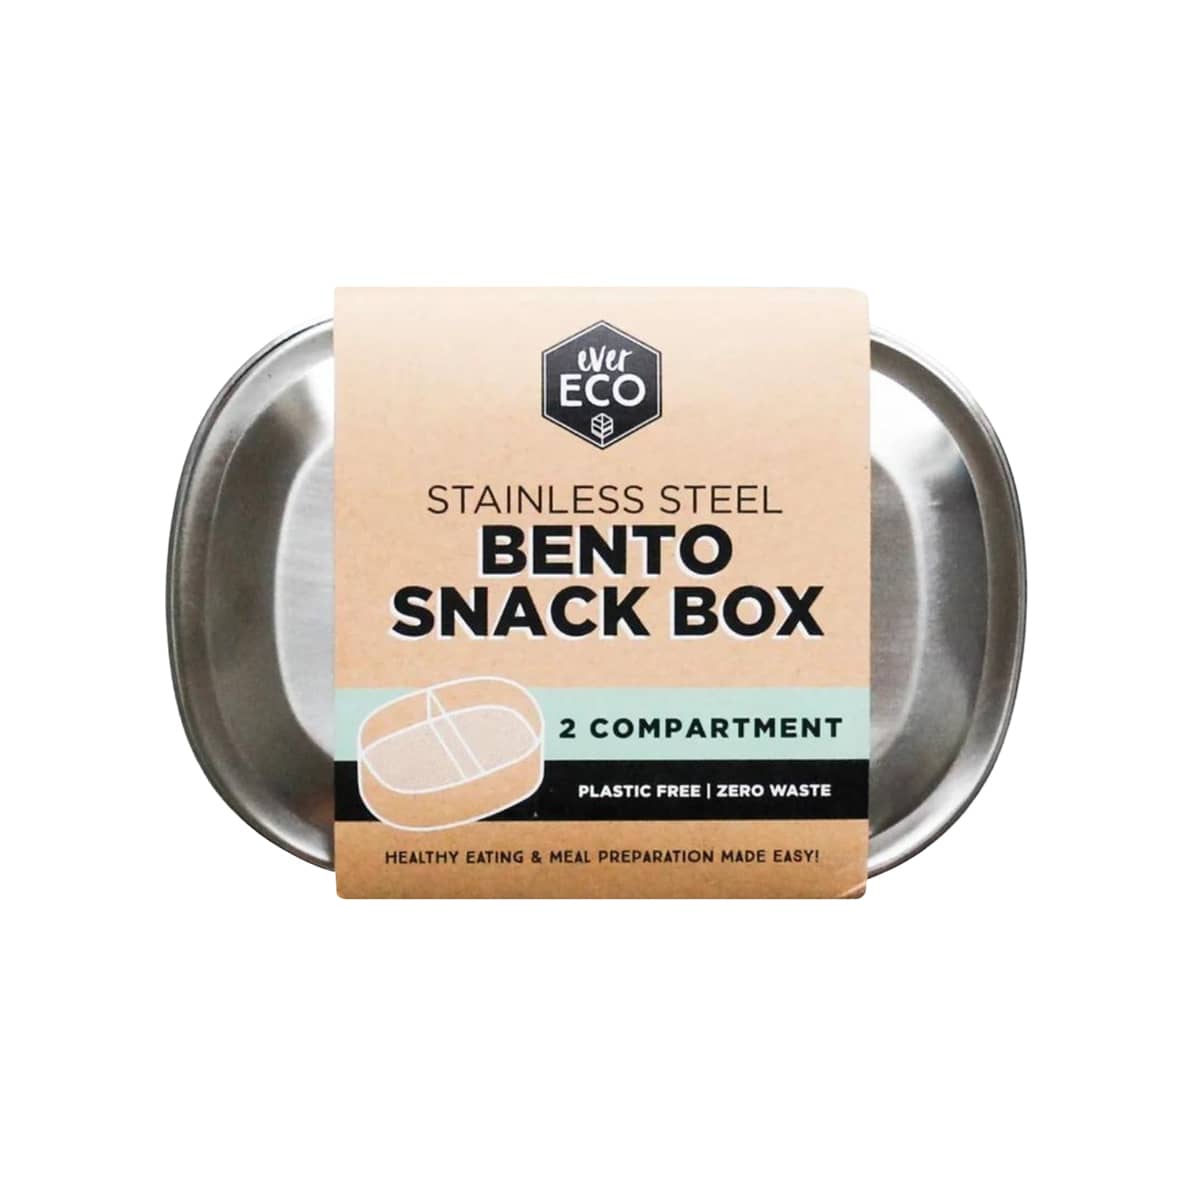 Ever Eco Stainless Steel Bento Snack Box - 2 Compartment